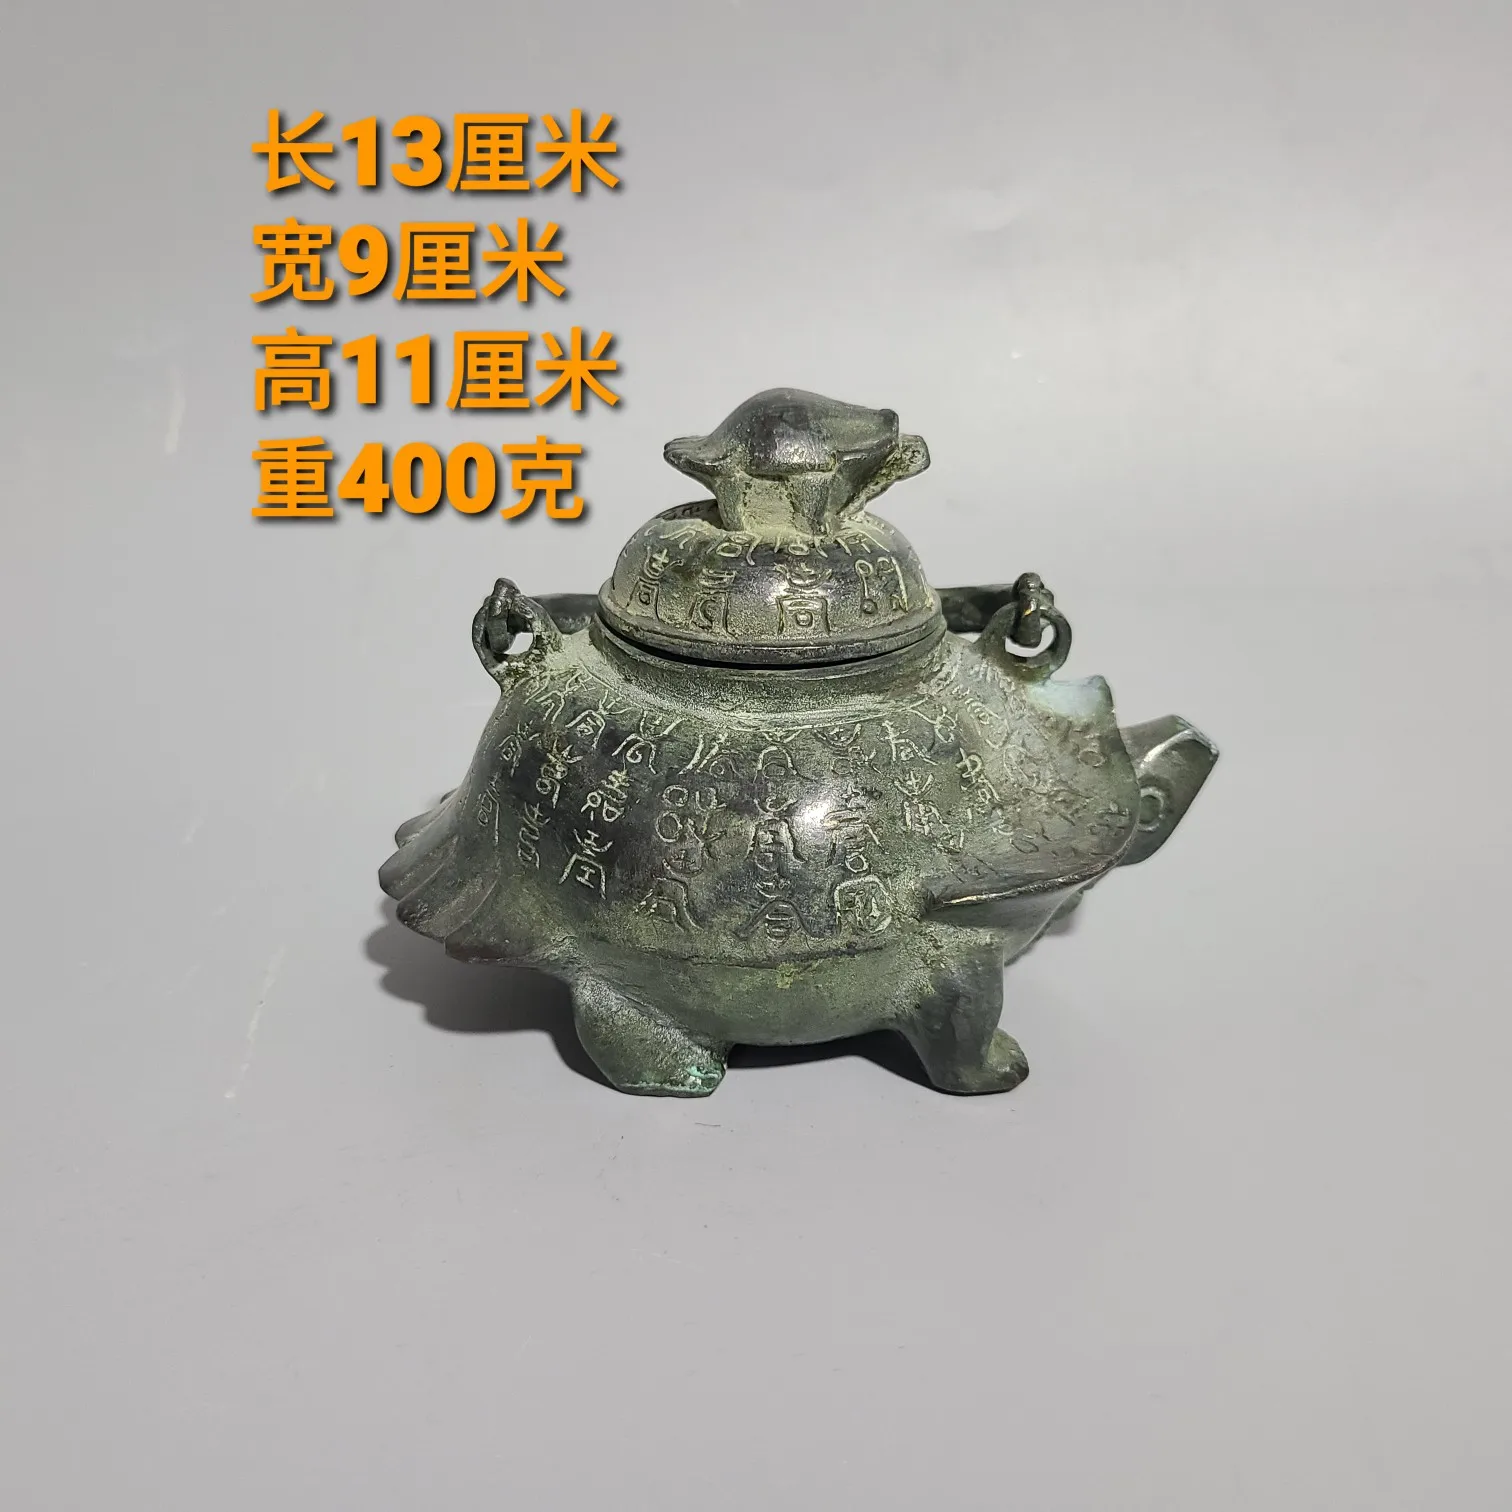 

Brass casting antique Qing Dynasty imperial beasts dragon turtle pot ornaments antique bronze decorative gifts